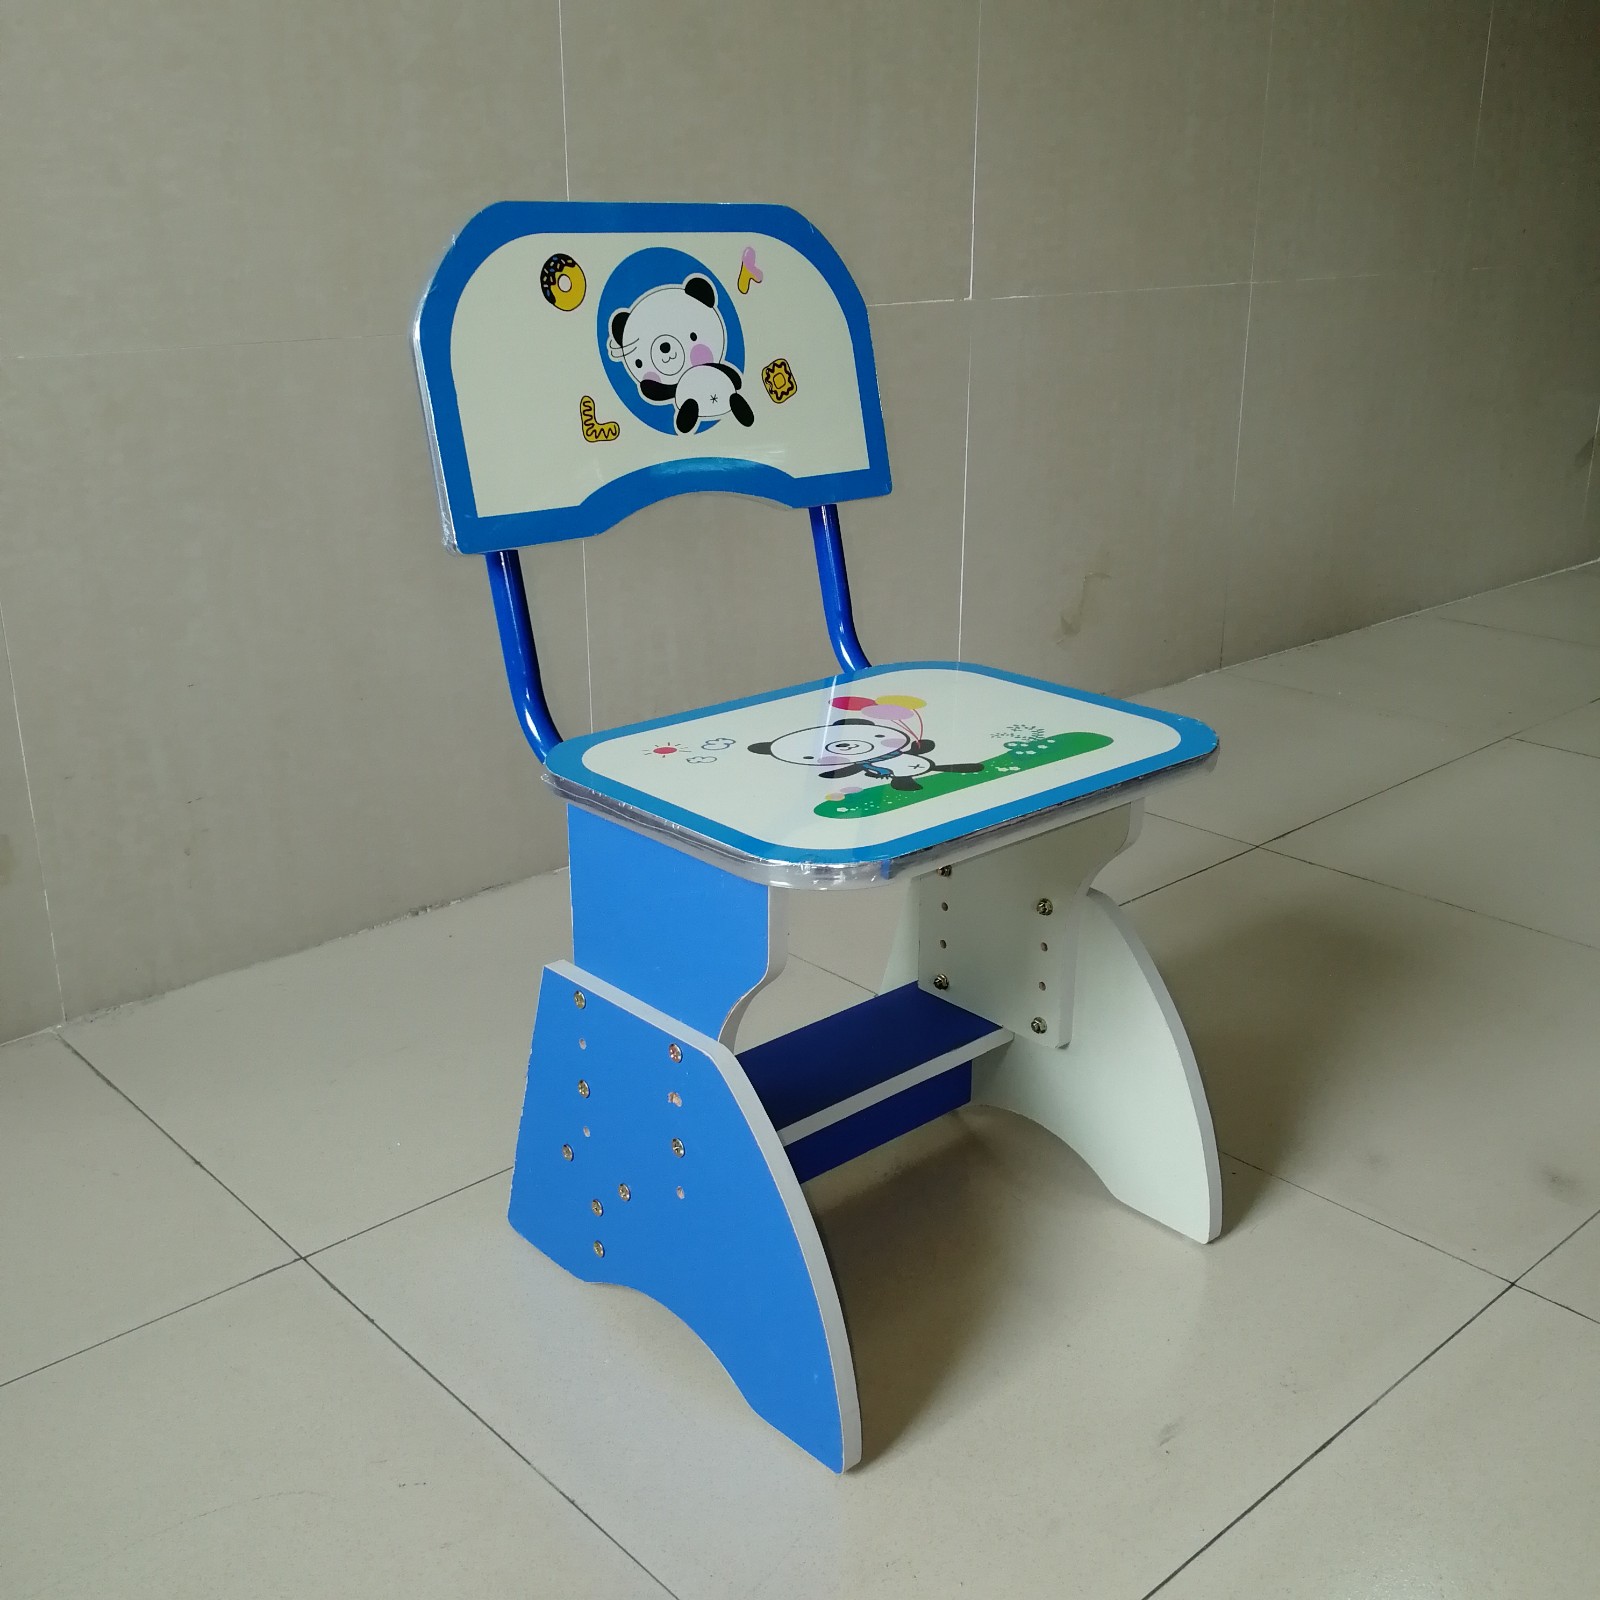 excellent study desk and chair set factory for home